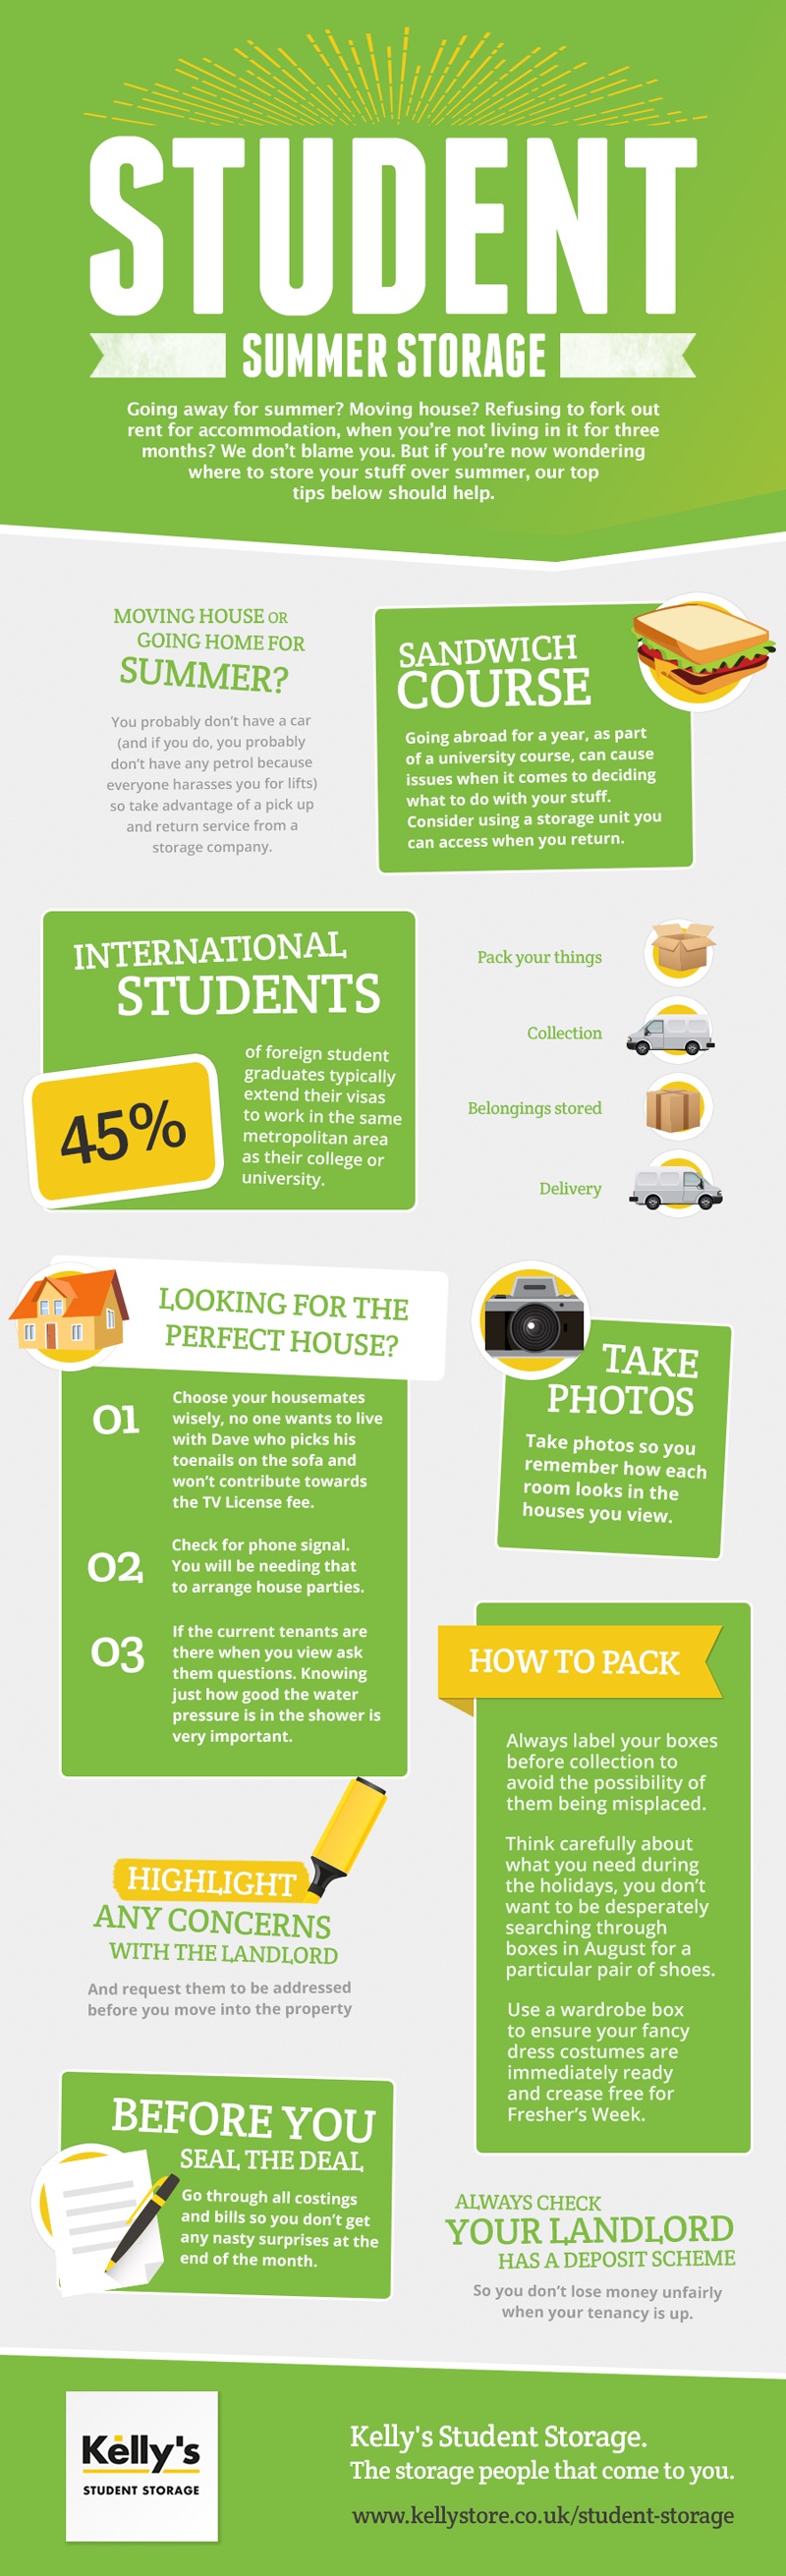 Student Summer Storage Tips Infographic